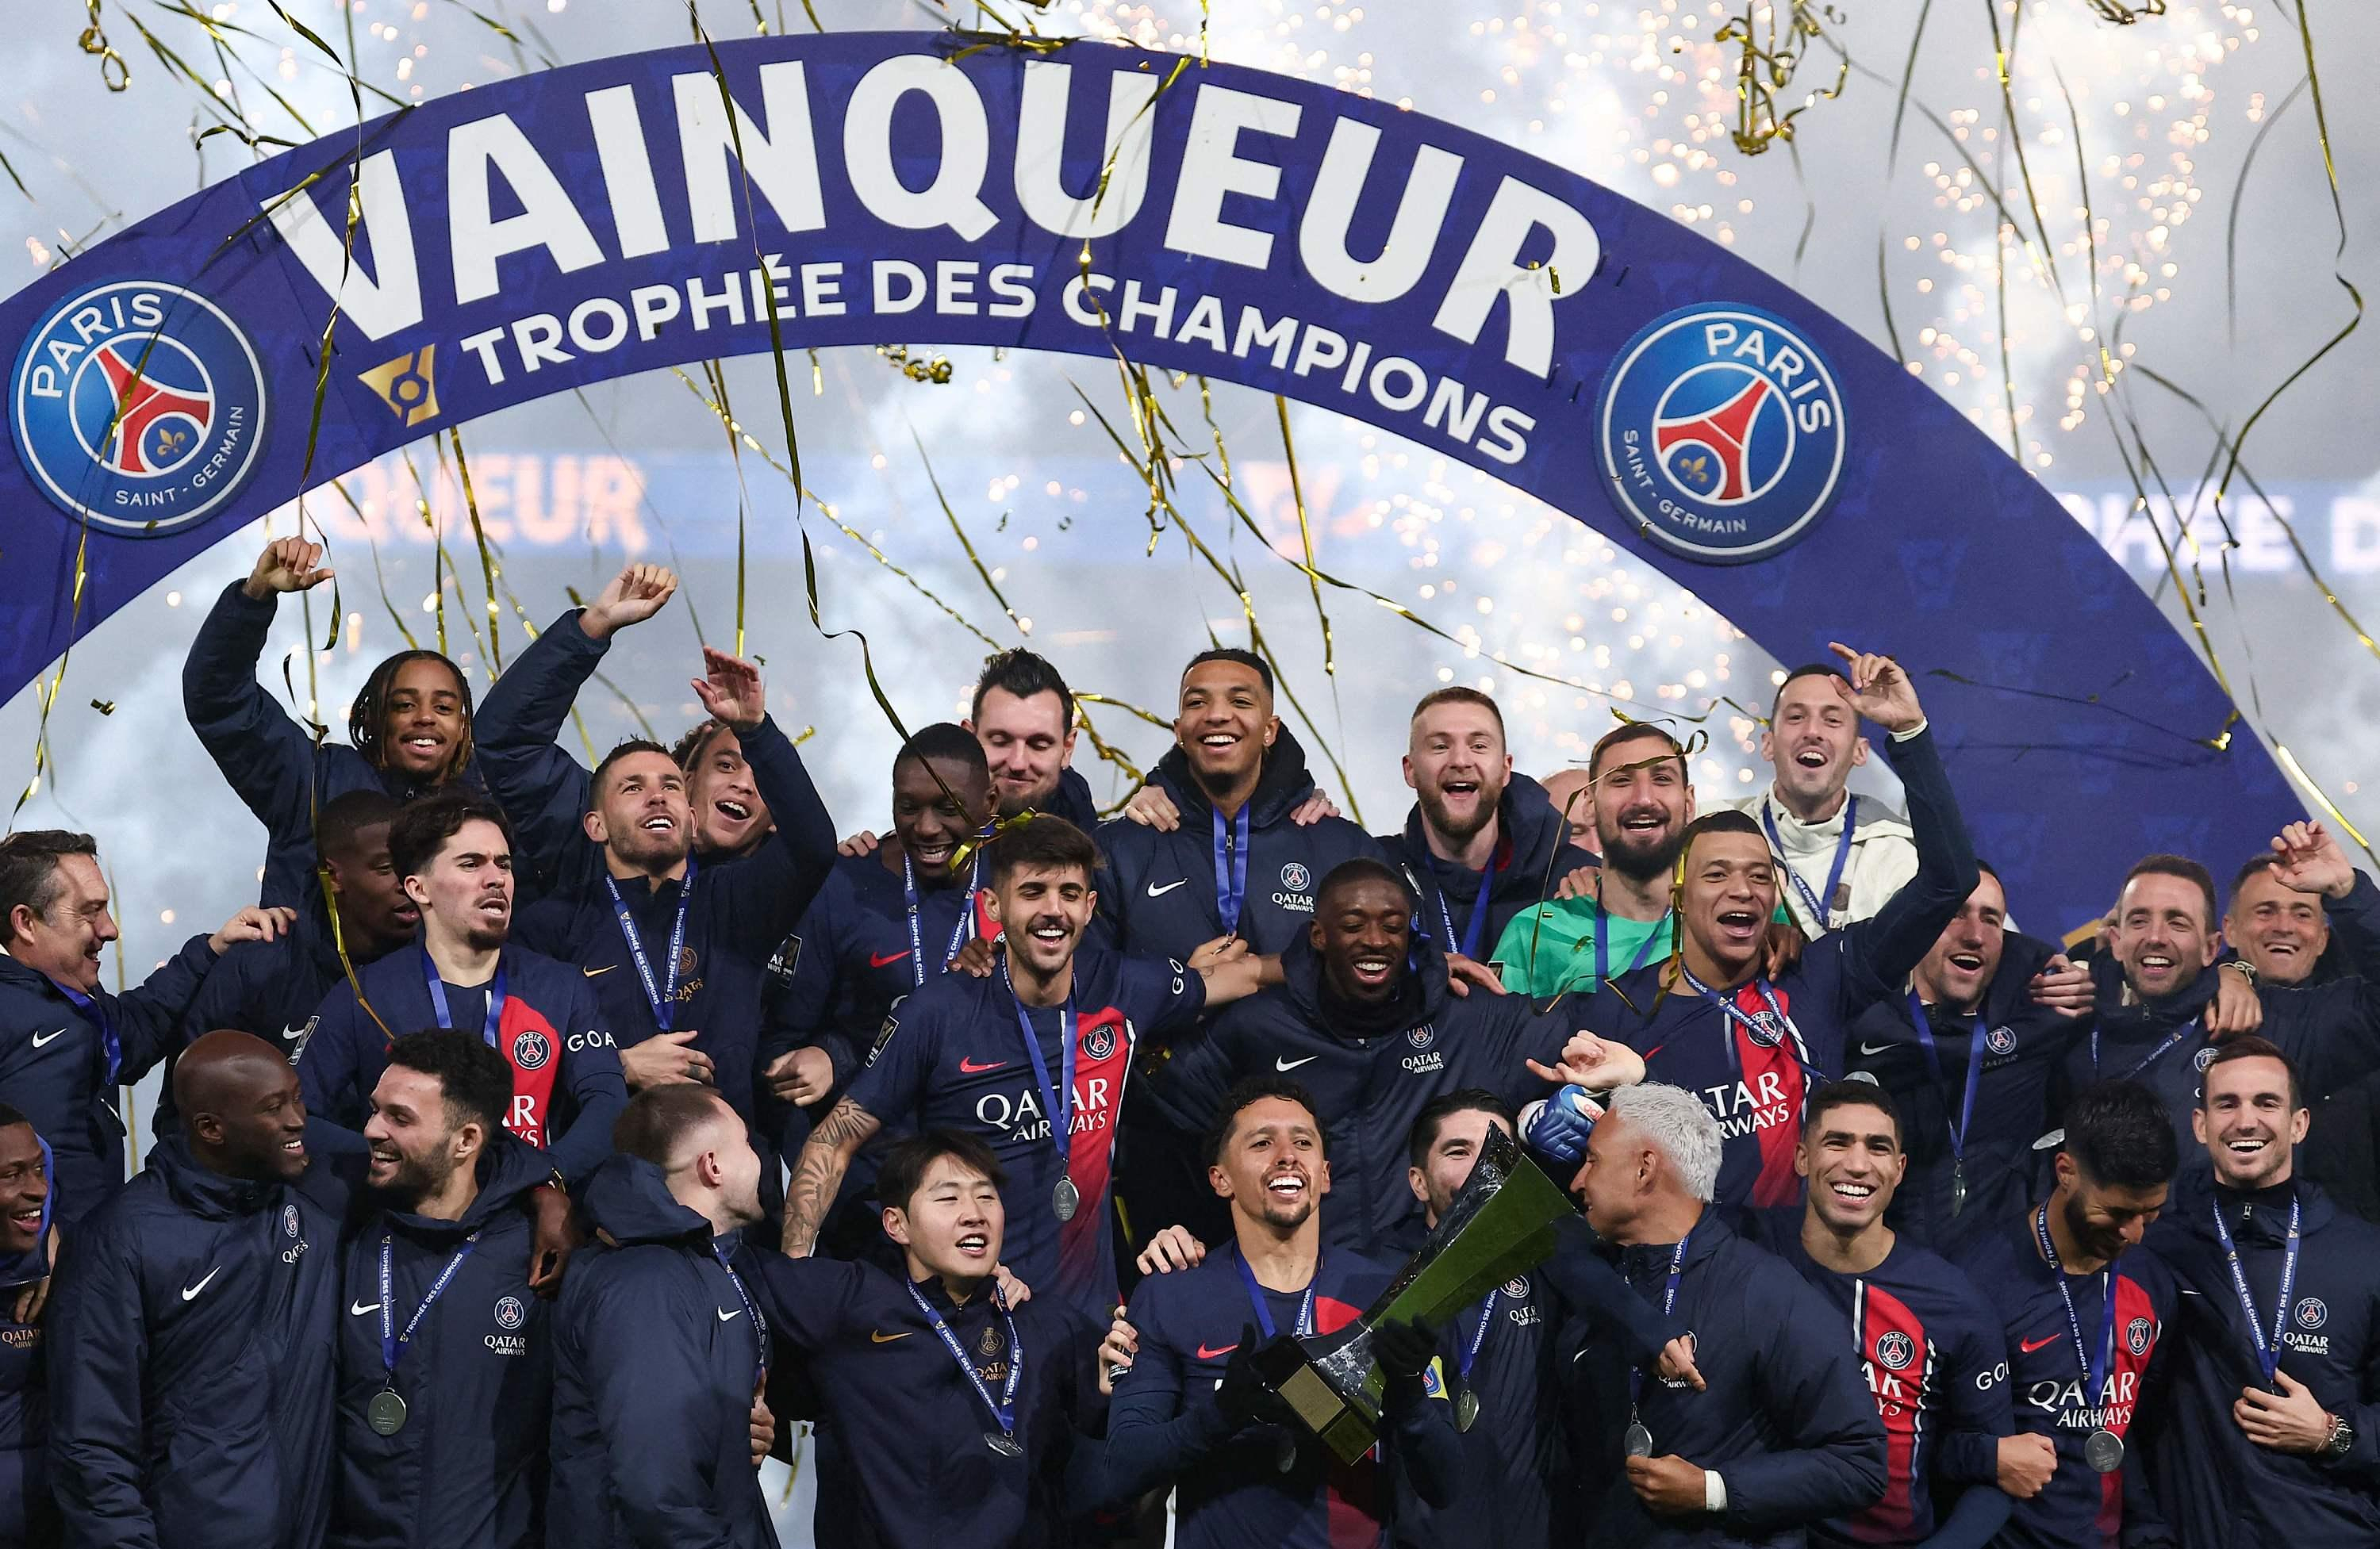 Champions Trophy: the ambition of PSG, the LFP farce… Favorites and scratches